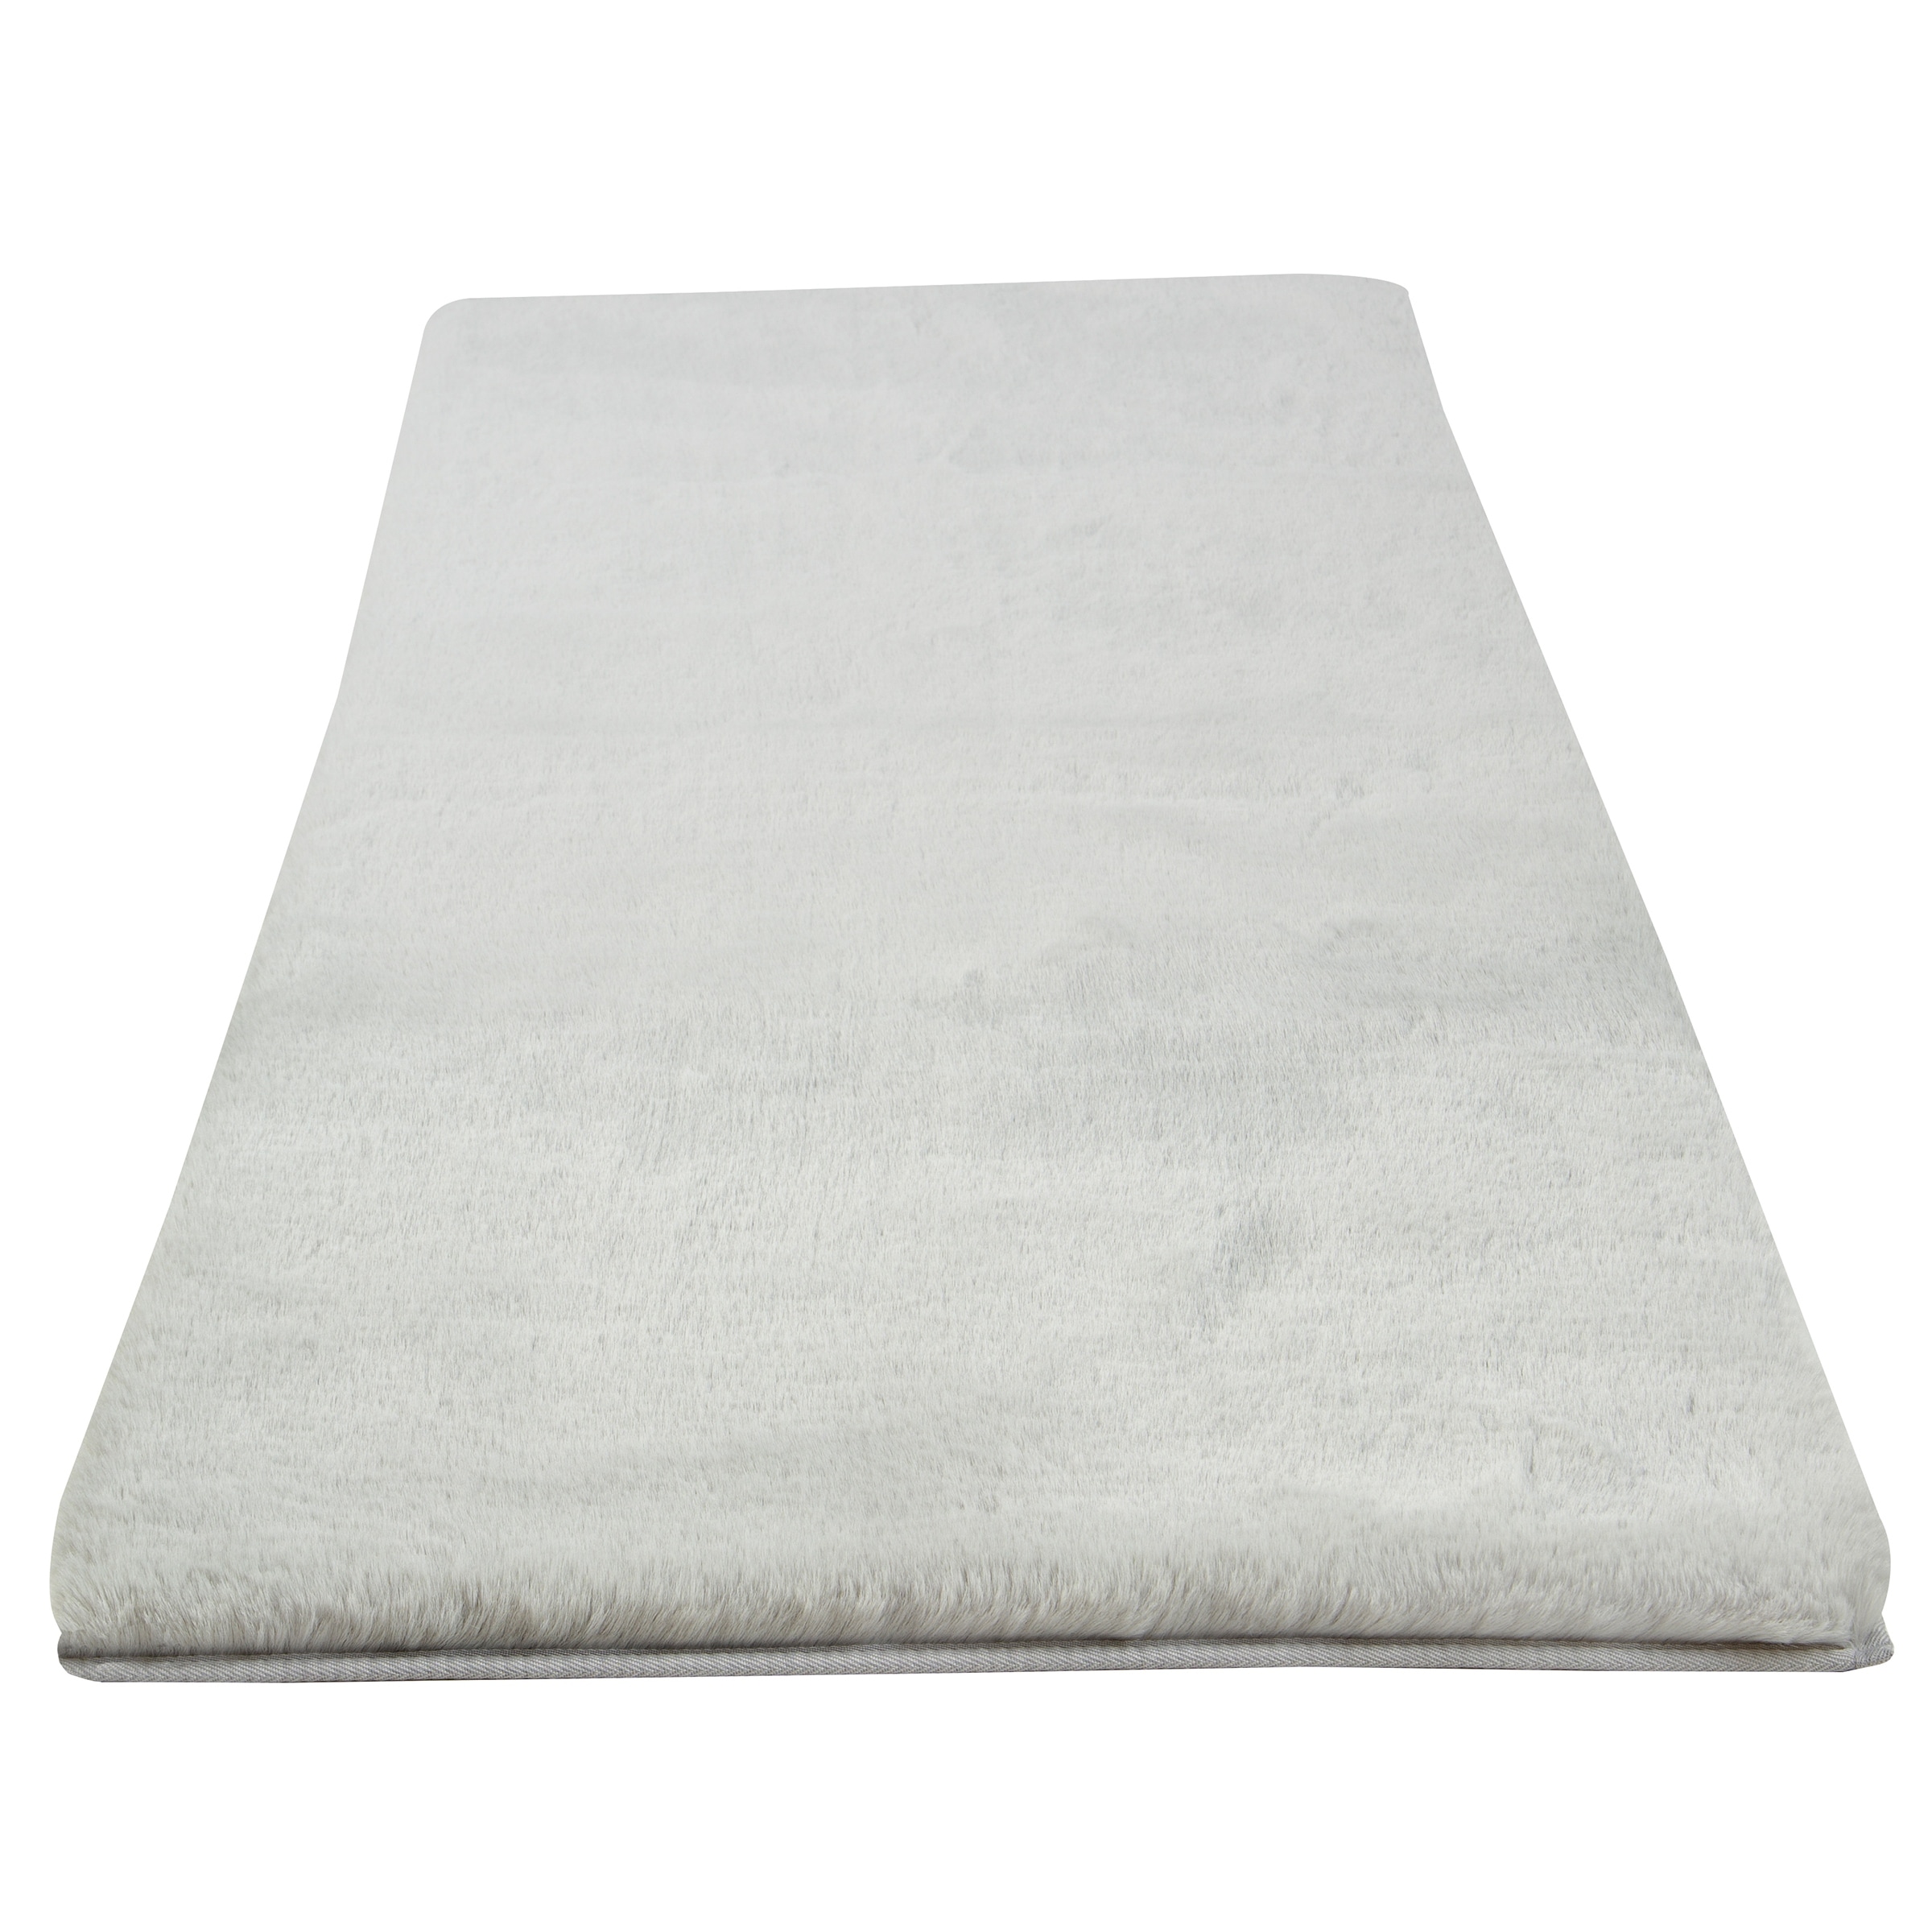 https://ak1.ostkcdn.com/images/products/is/images/direct/0acc47f54936eda1b6ae46762ff2ee5806a5f517/Faux-Fur-Bath-Mat---21x60-Inch-Nonslip-Rug-by-Home-Complete.jpg